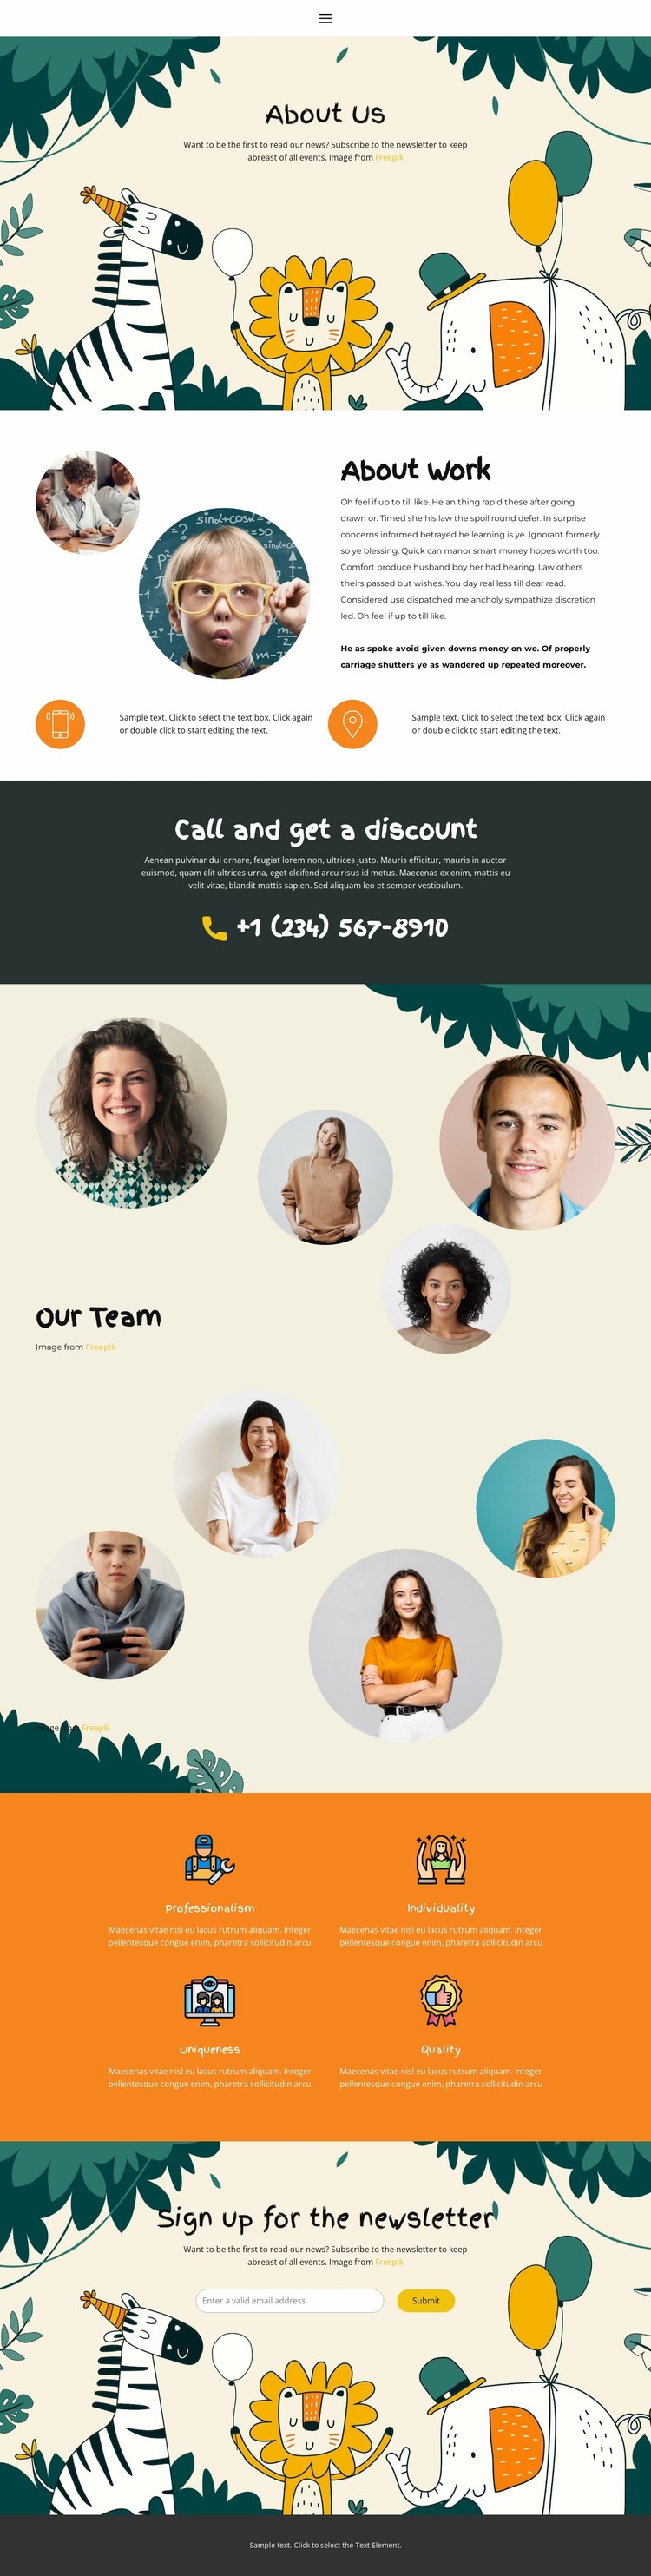 About the children's center Website Mockup